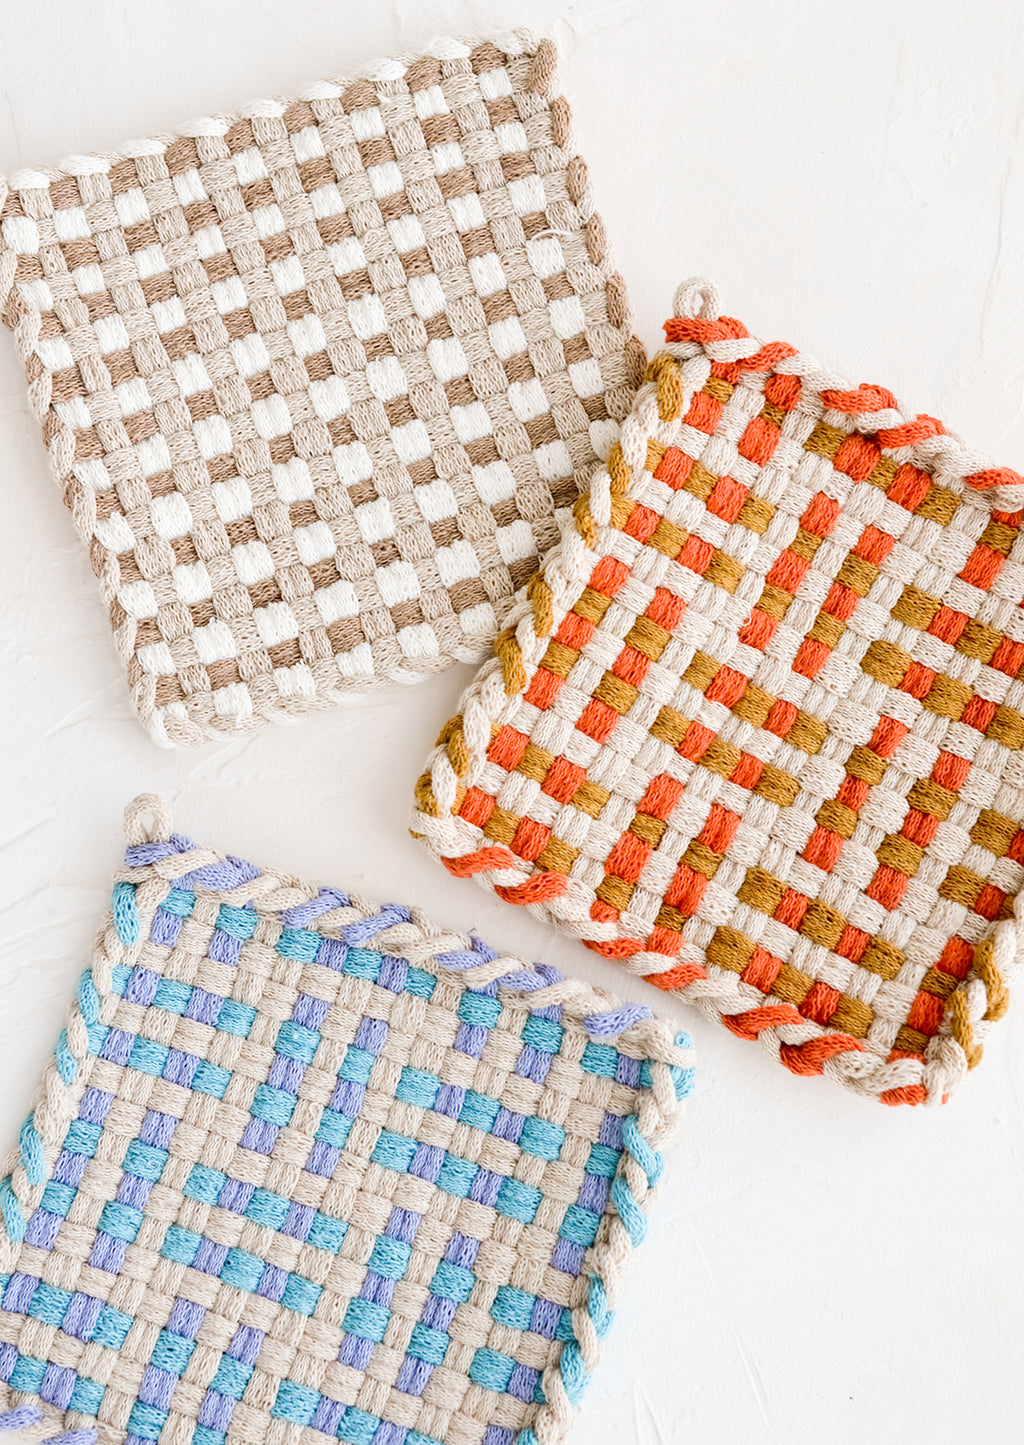 2: Hand knit potholders in assorted colors and patterns.